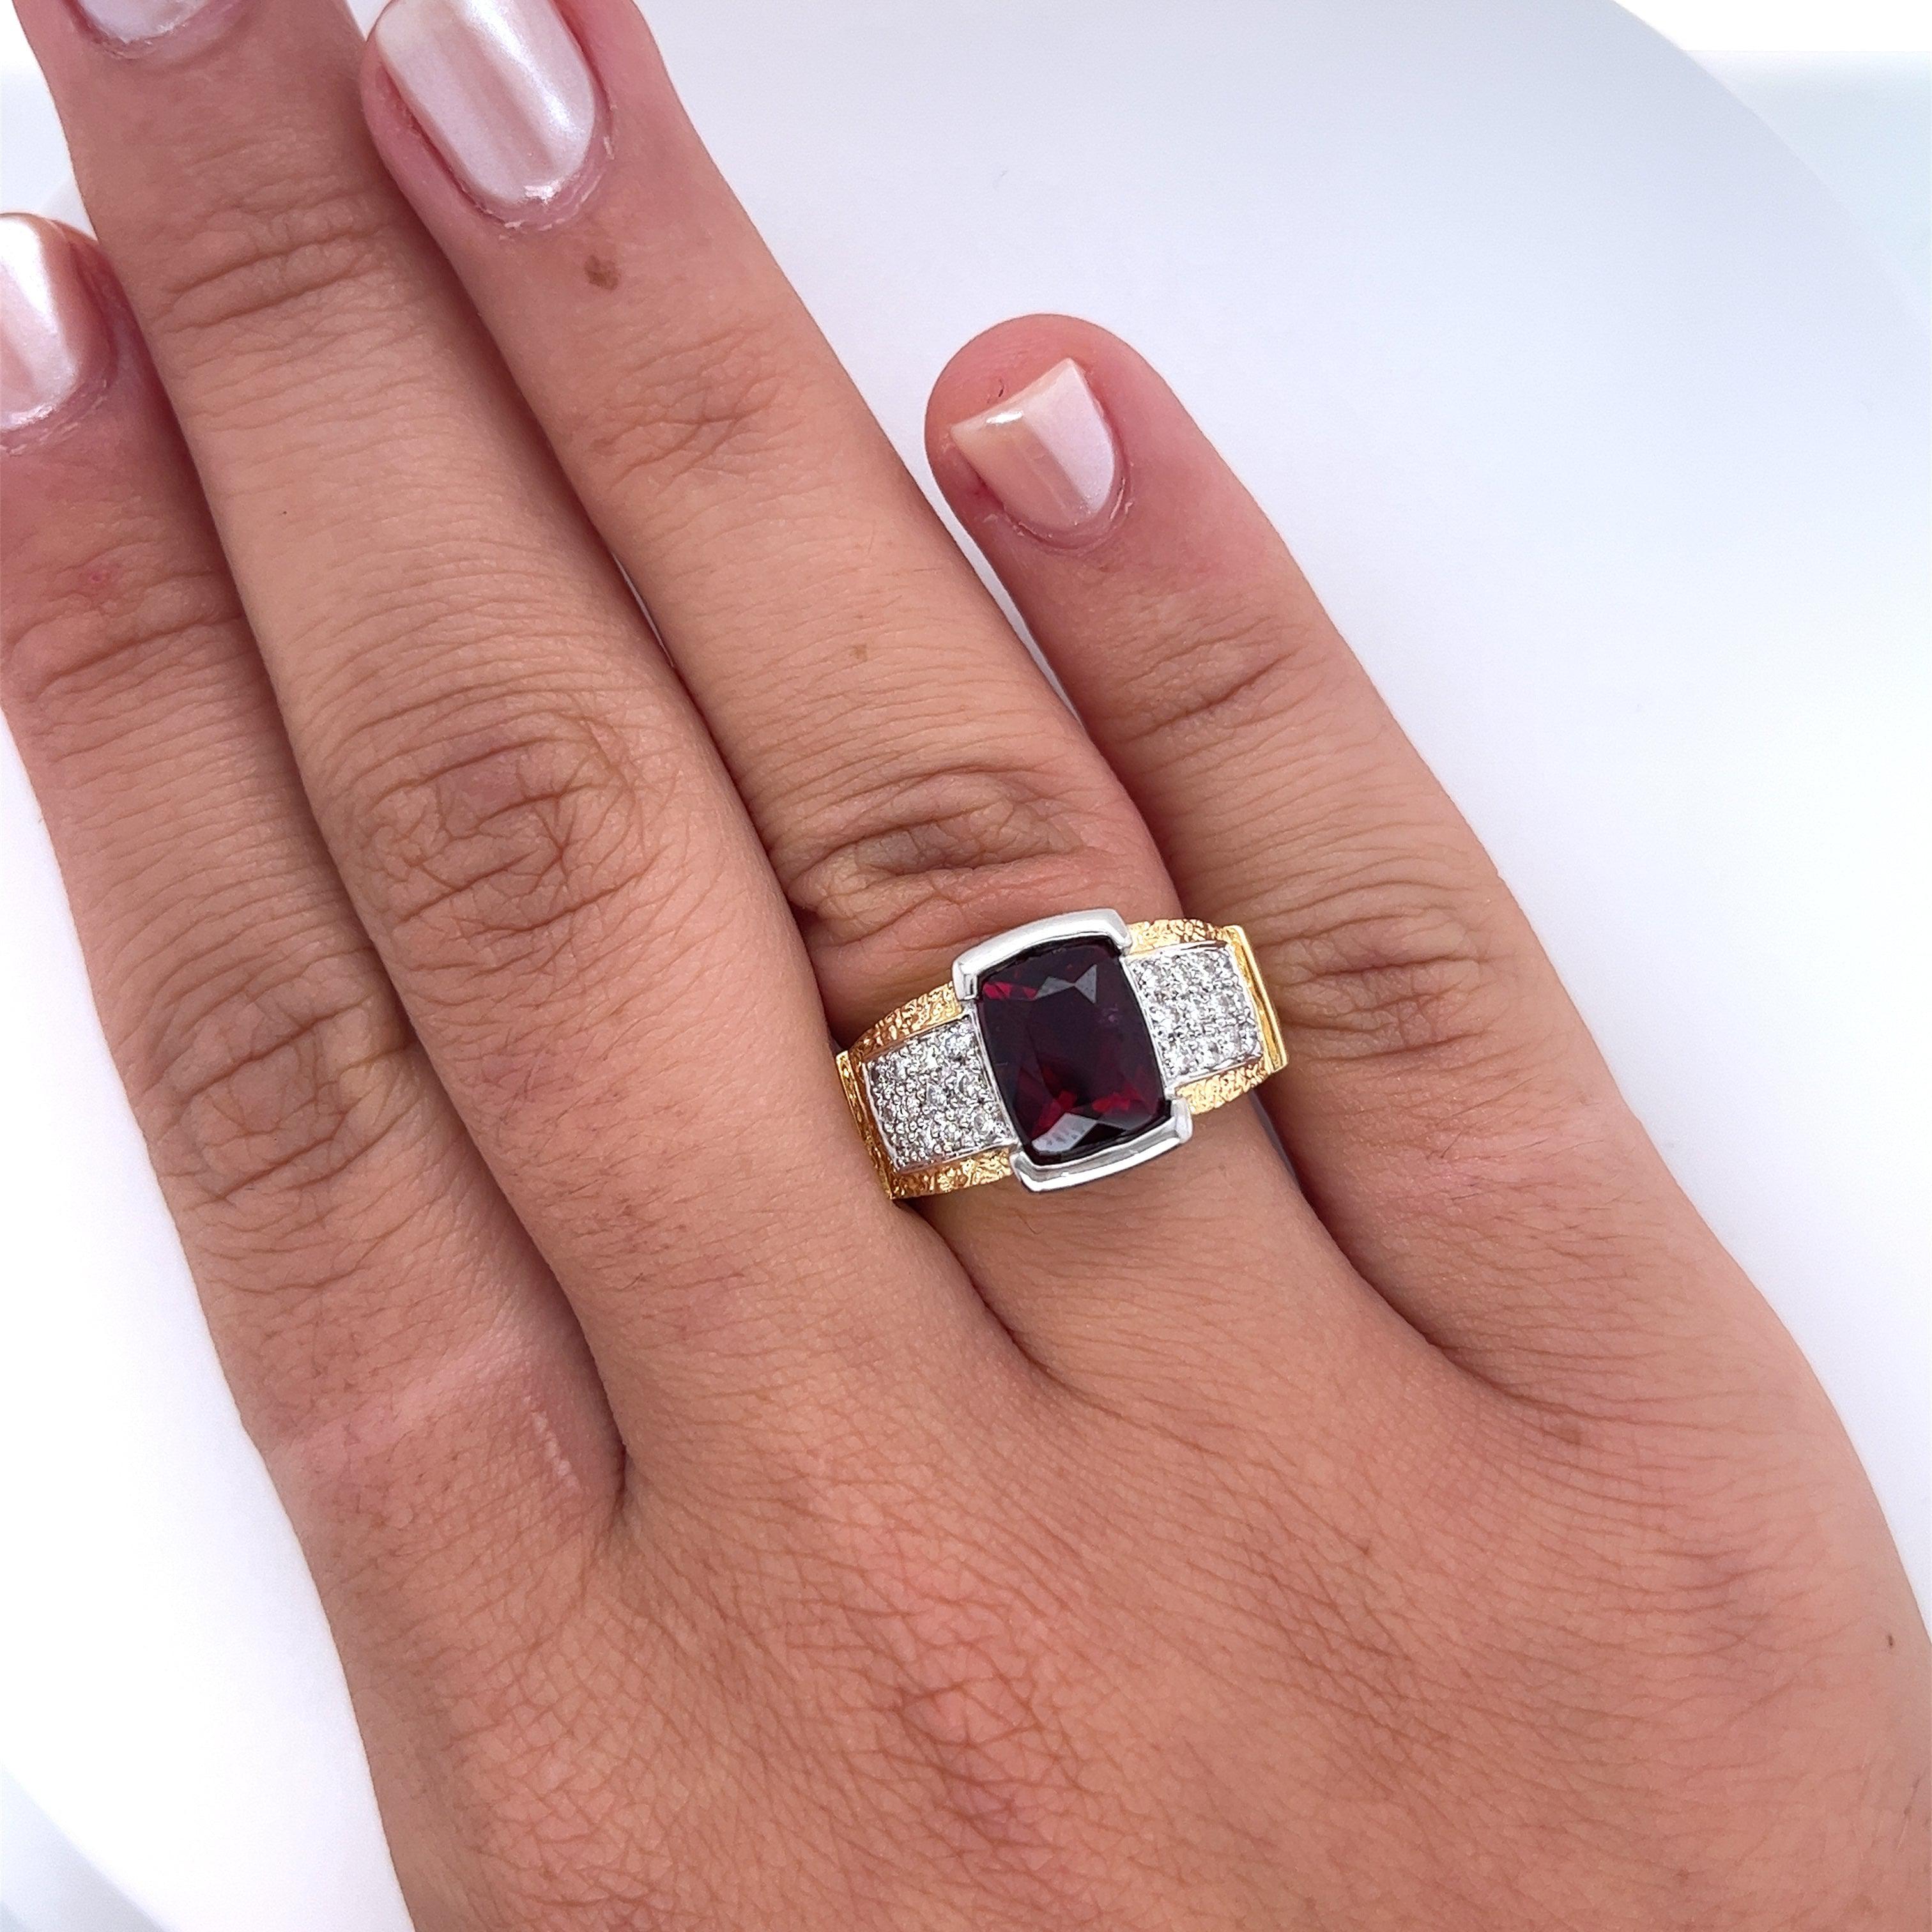 Vintage-Radiant-Cut-4_50-Carat-Red-Rubellite-Tourmaline-and-Diamond-Ring-in-Platinum-and-18K-Gold-Semi-Precious-Jewelry-2.jpg